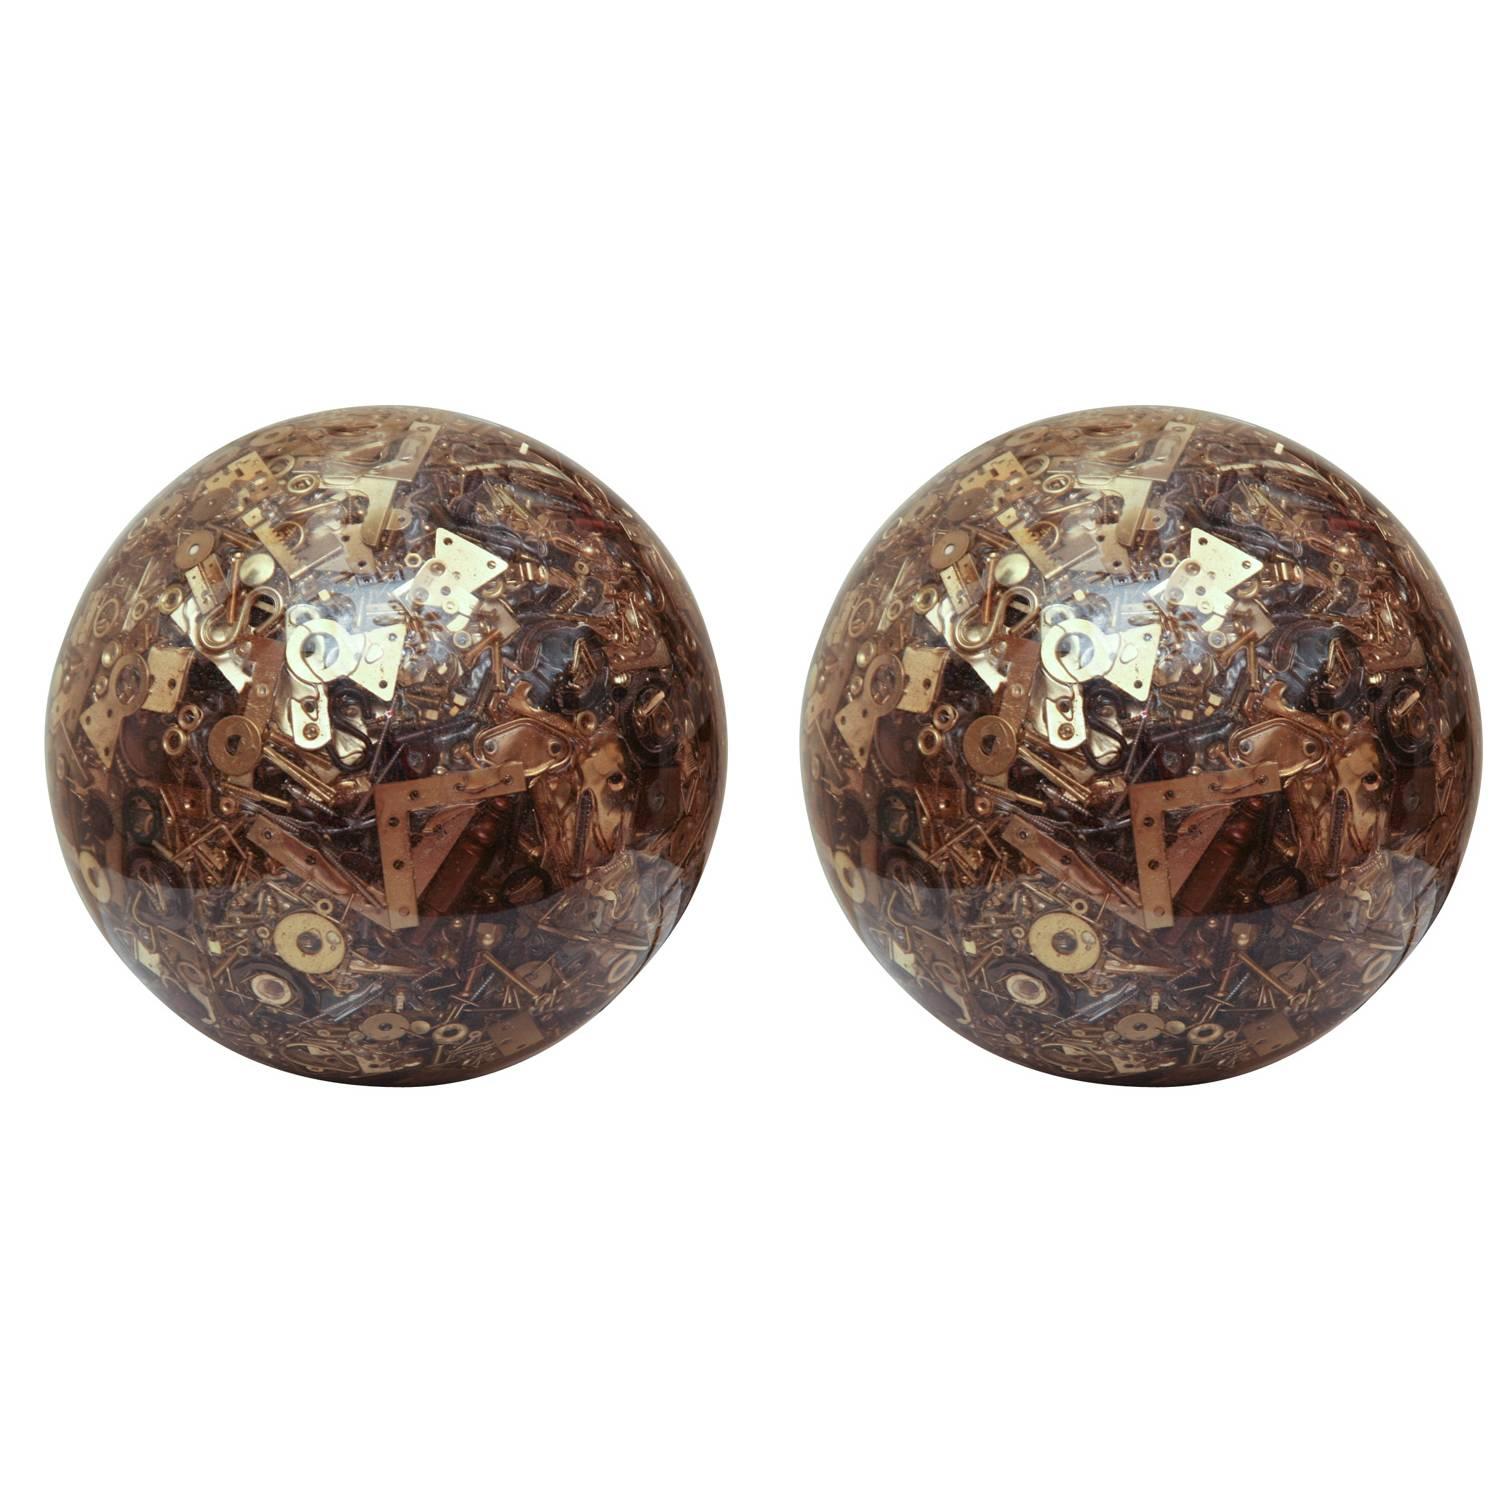 Resin Spheres Composed of Miscellaneous Vintage Hardware Parts